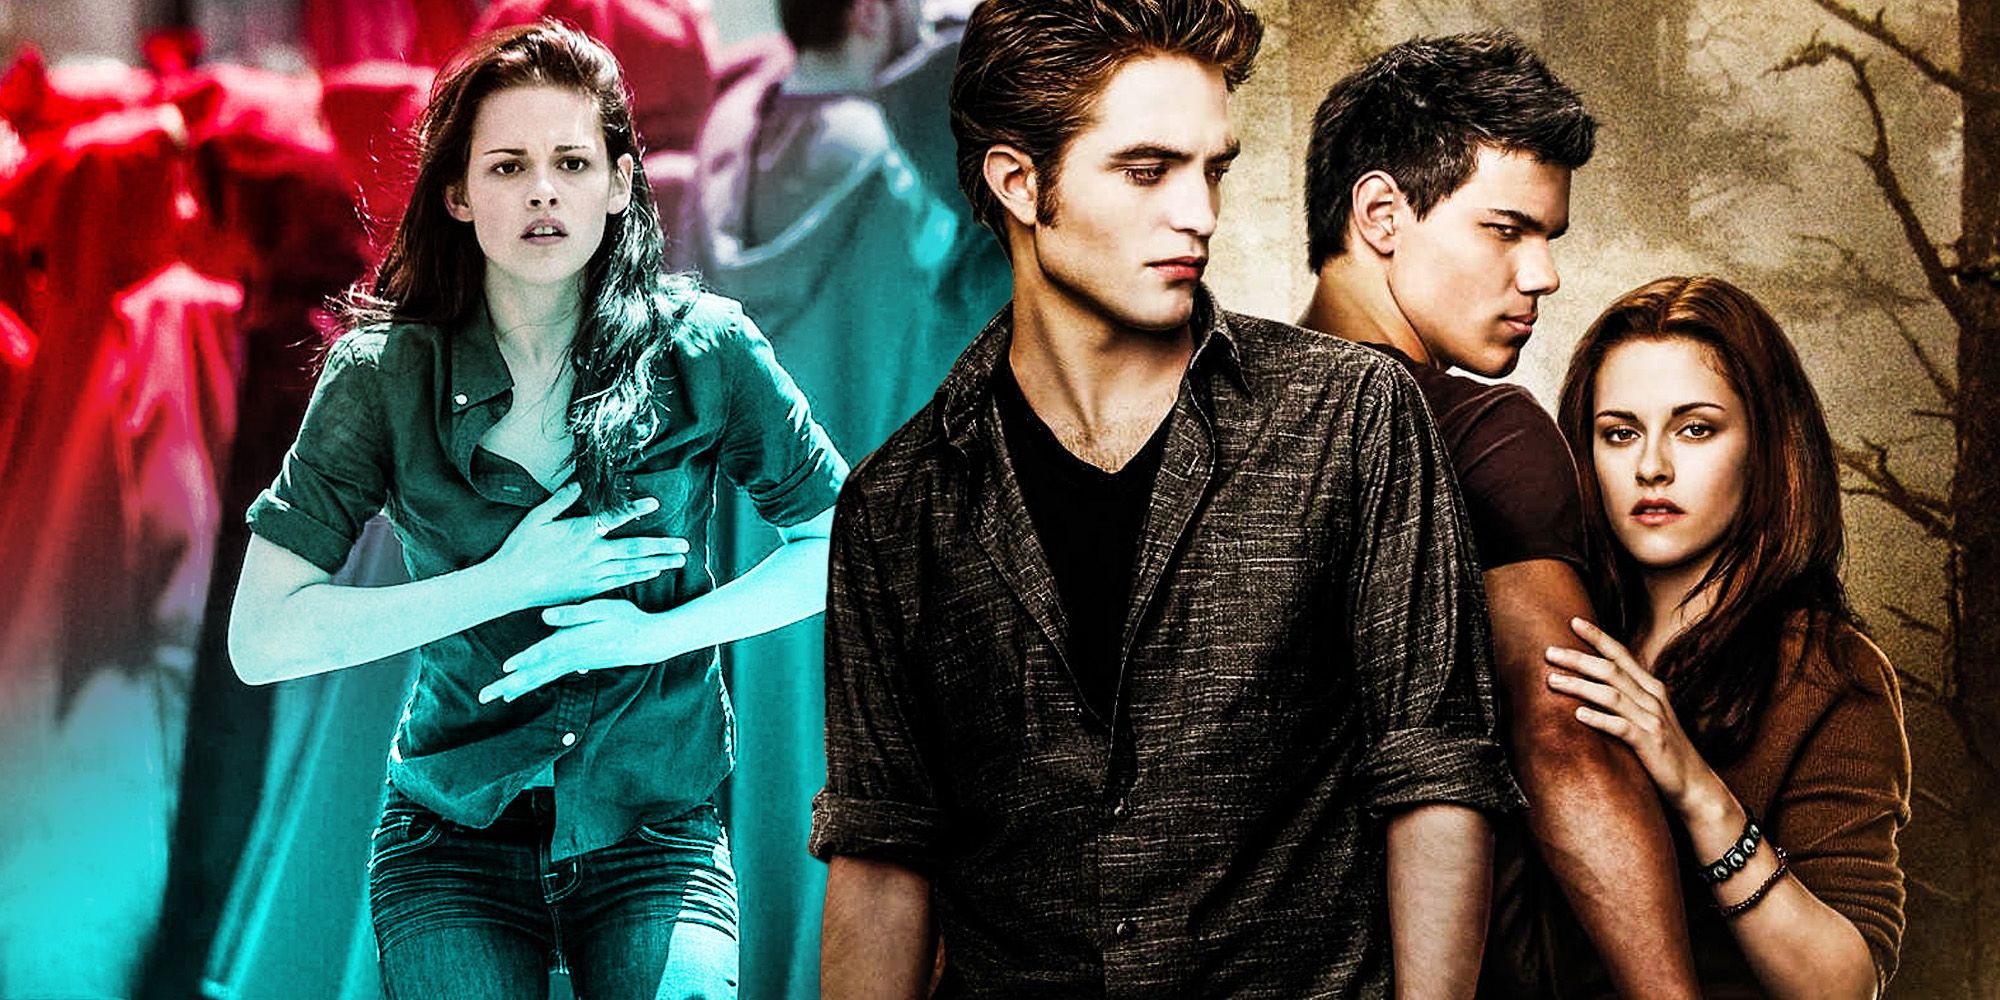 Twilight new moon became the weakest movie